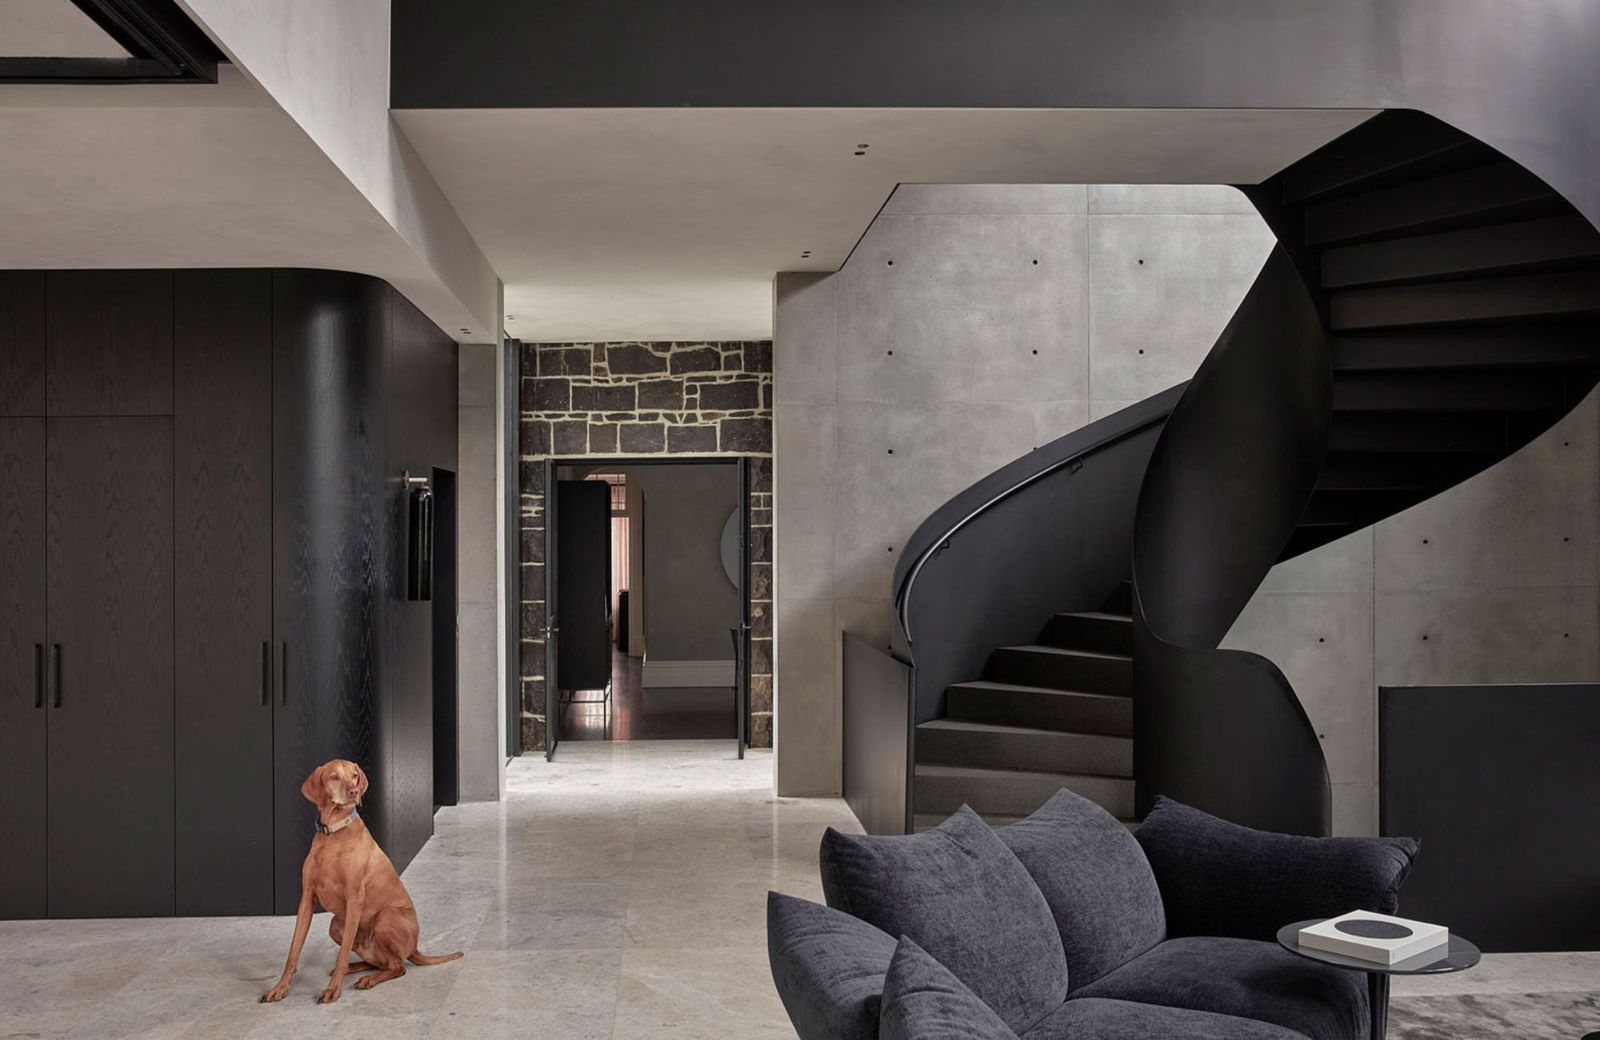 Park House by Pleysier Perkins. Living room, featuring black spiral staircase